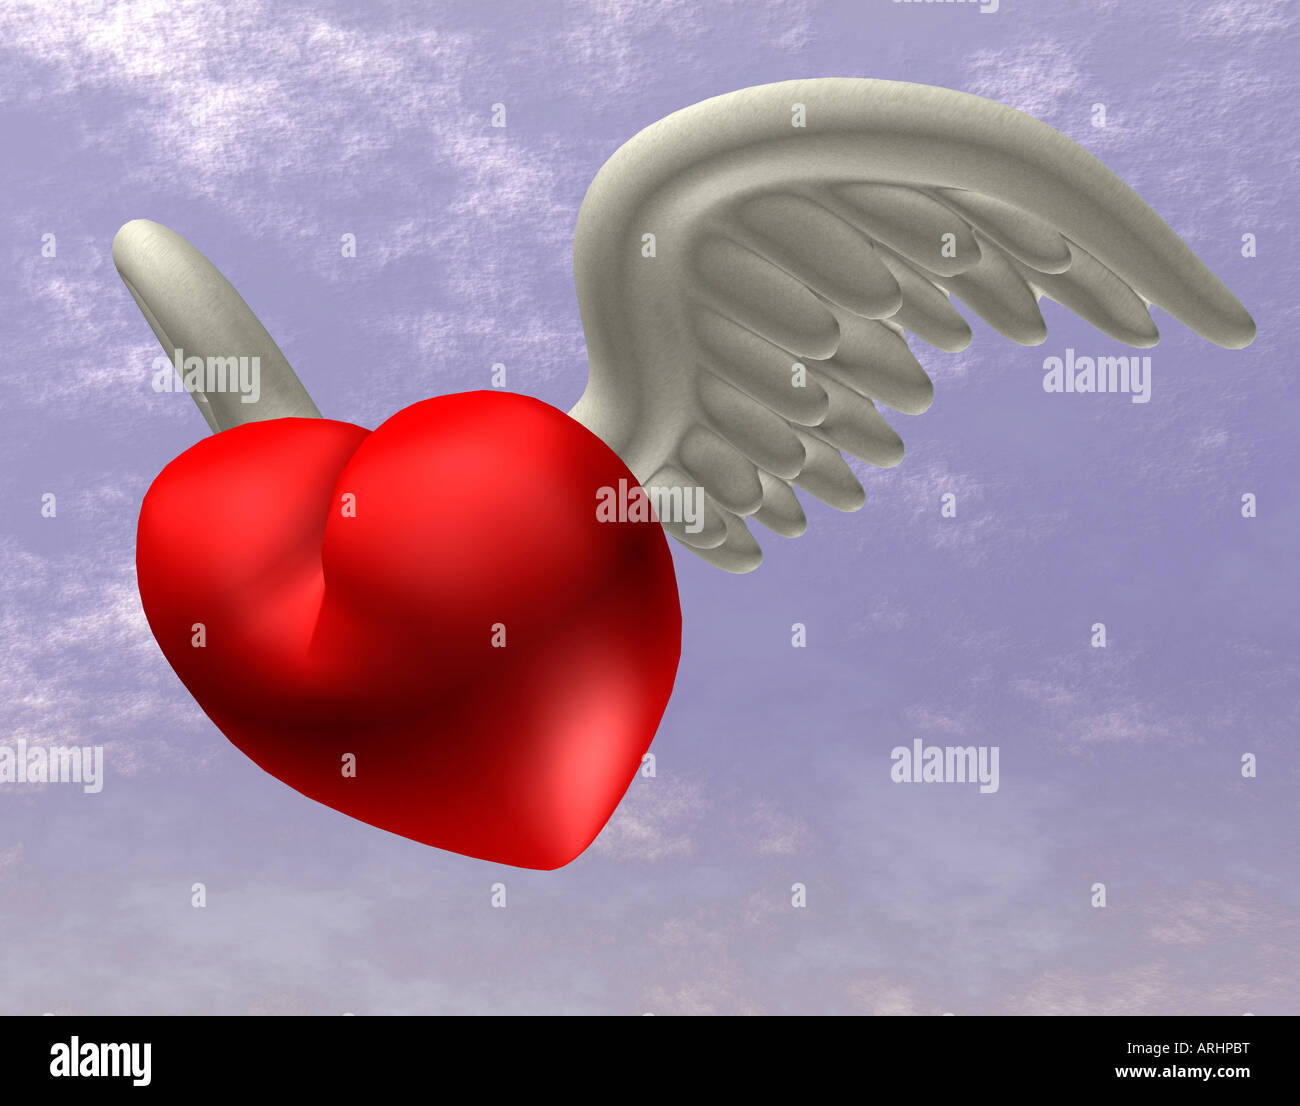 Heart with wings as a symbol of love Stock Photo